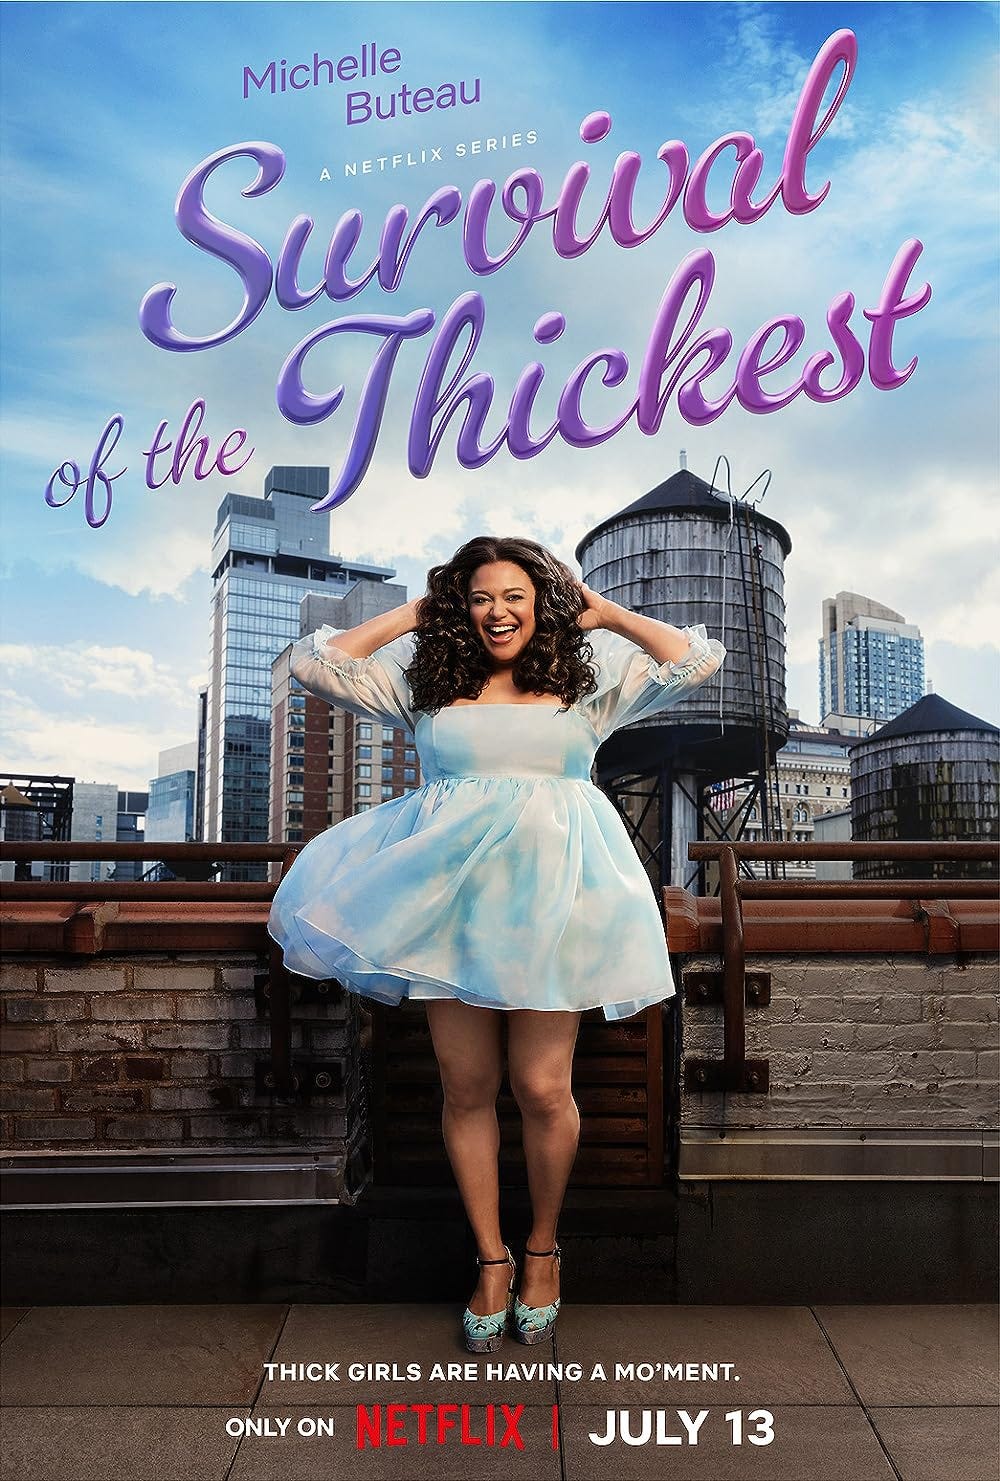 Poster featuring Michelle Buteau standing on a rooftop in New York with the text Survival of the Thickest